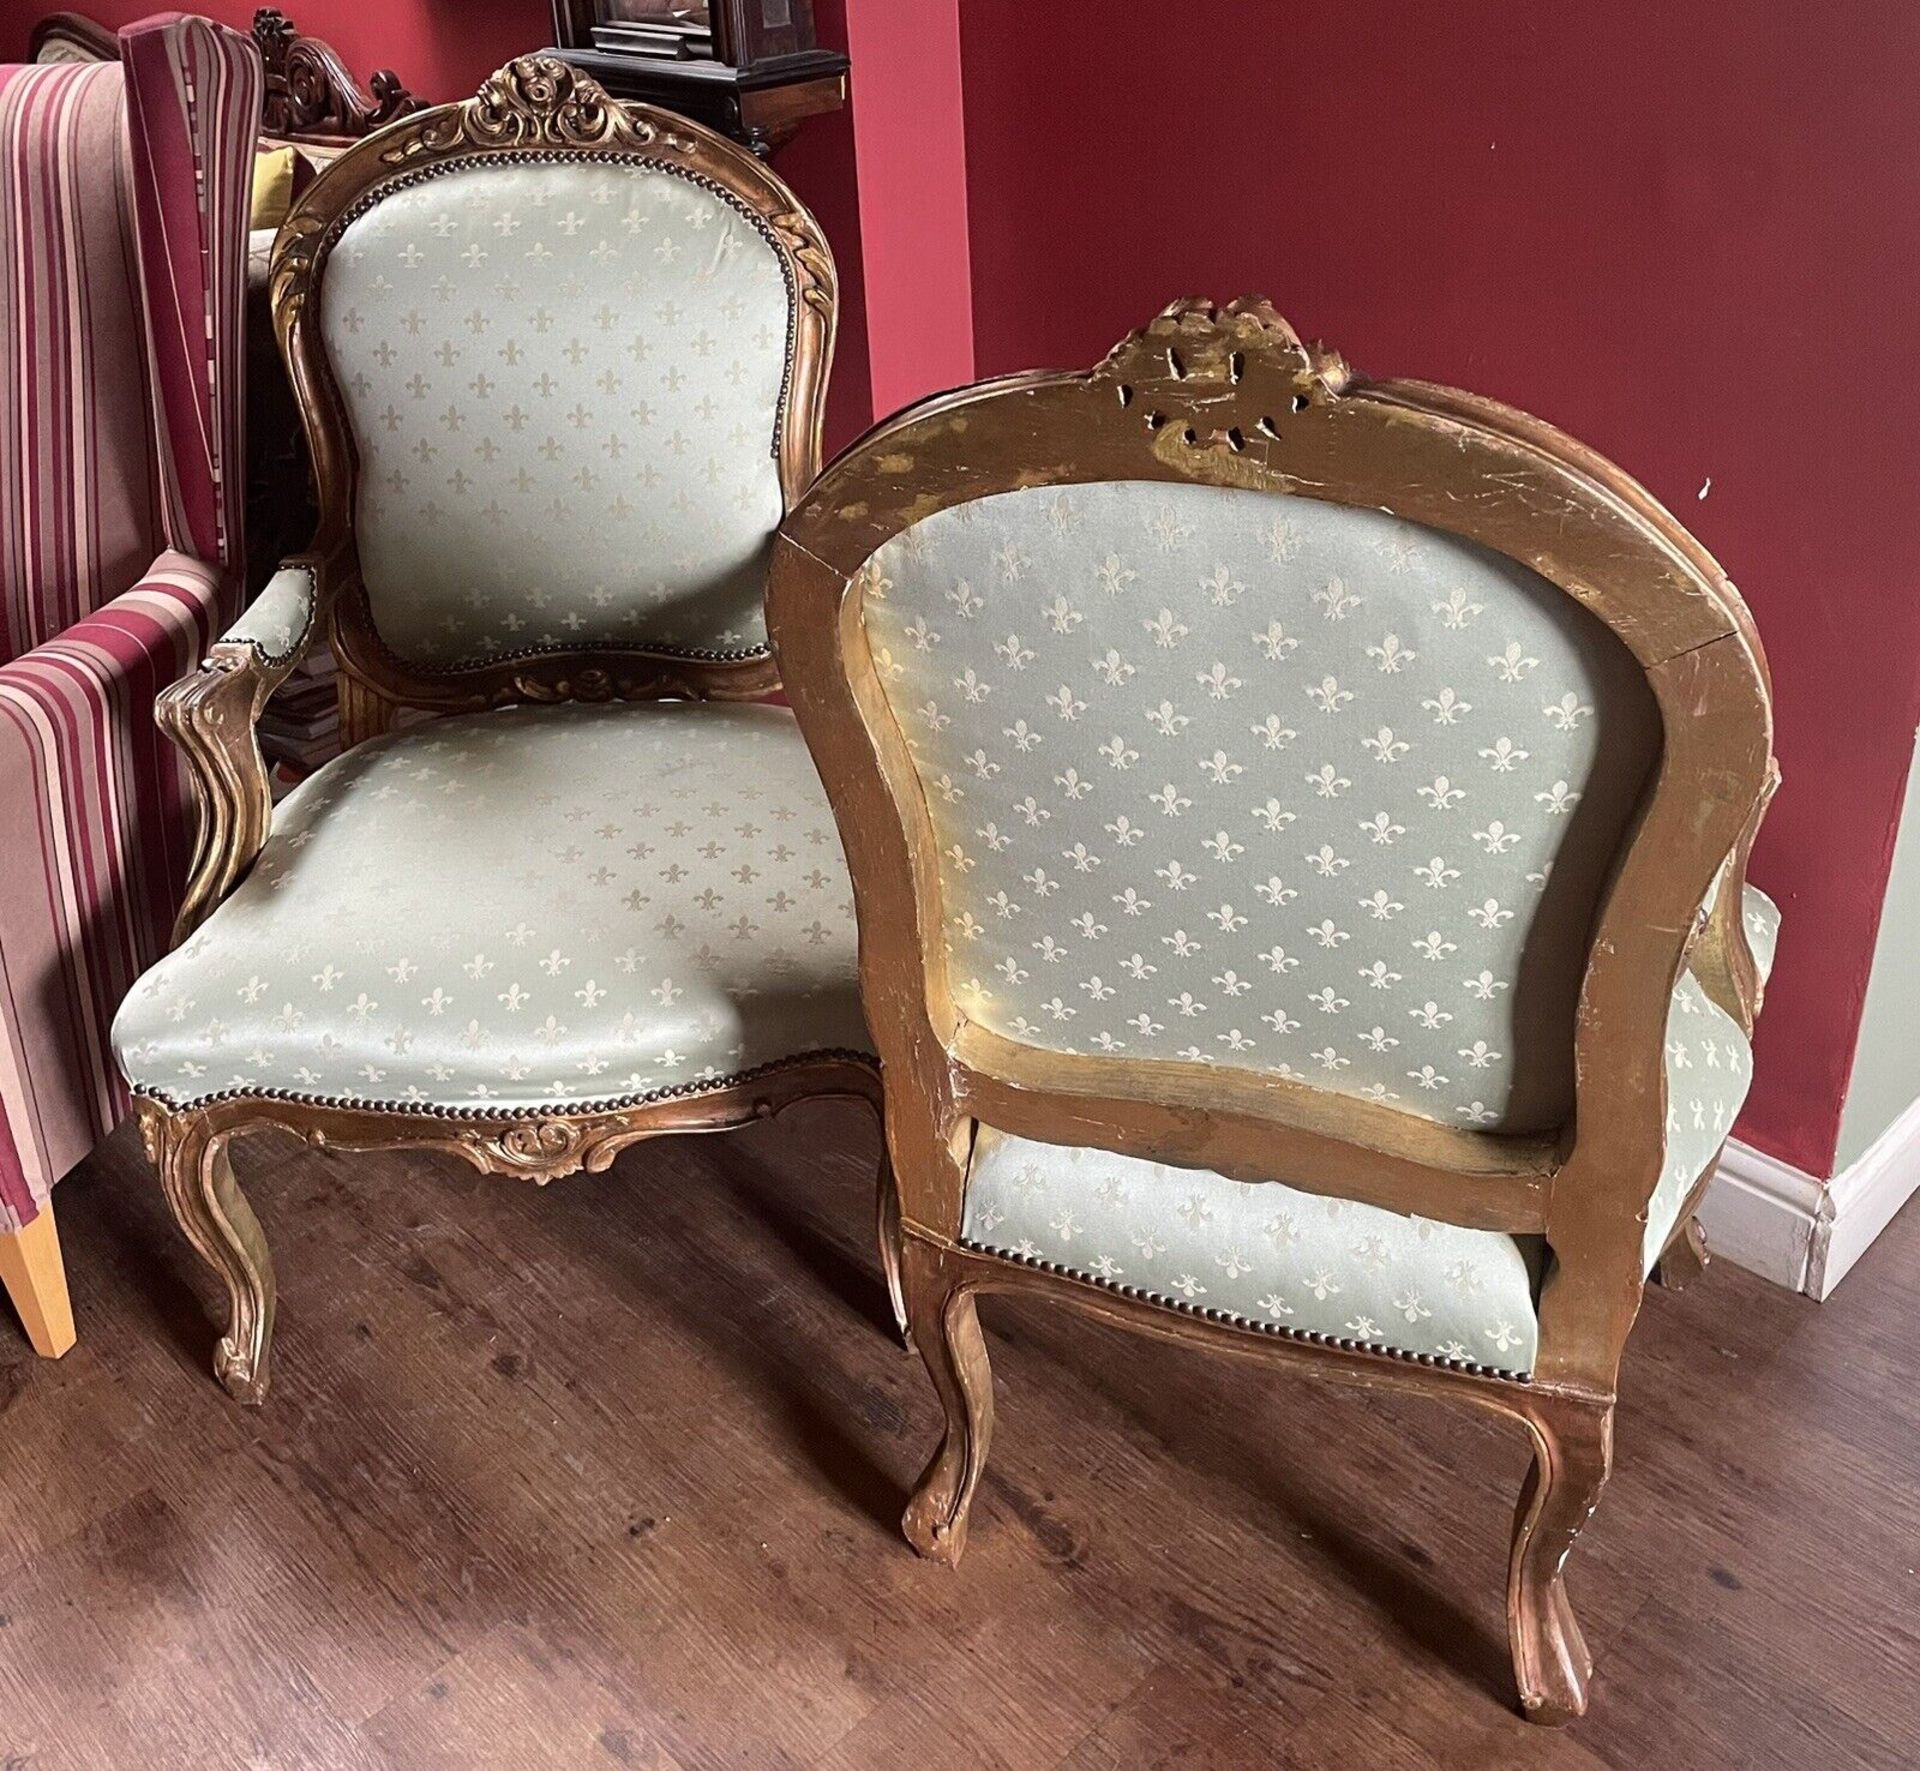 A Pair of Fauteuils In Louis XVI Style Carved Gilt Wood Arm Chairs Upholstered In Fleur De Lys - Image 4 of 10